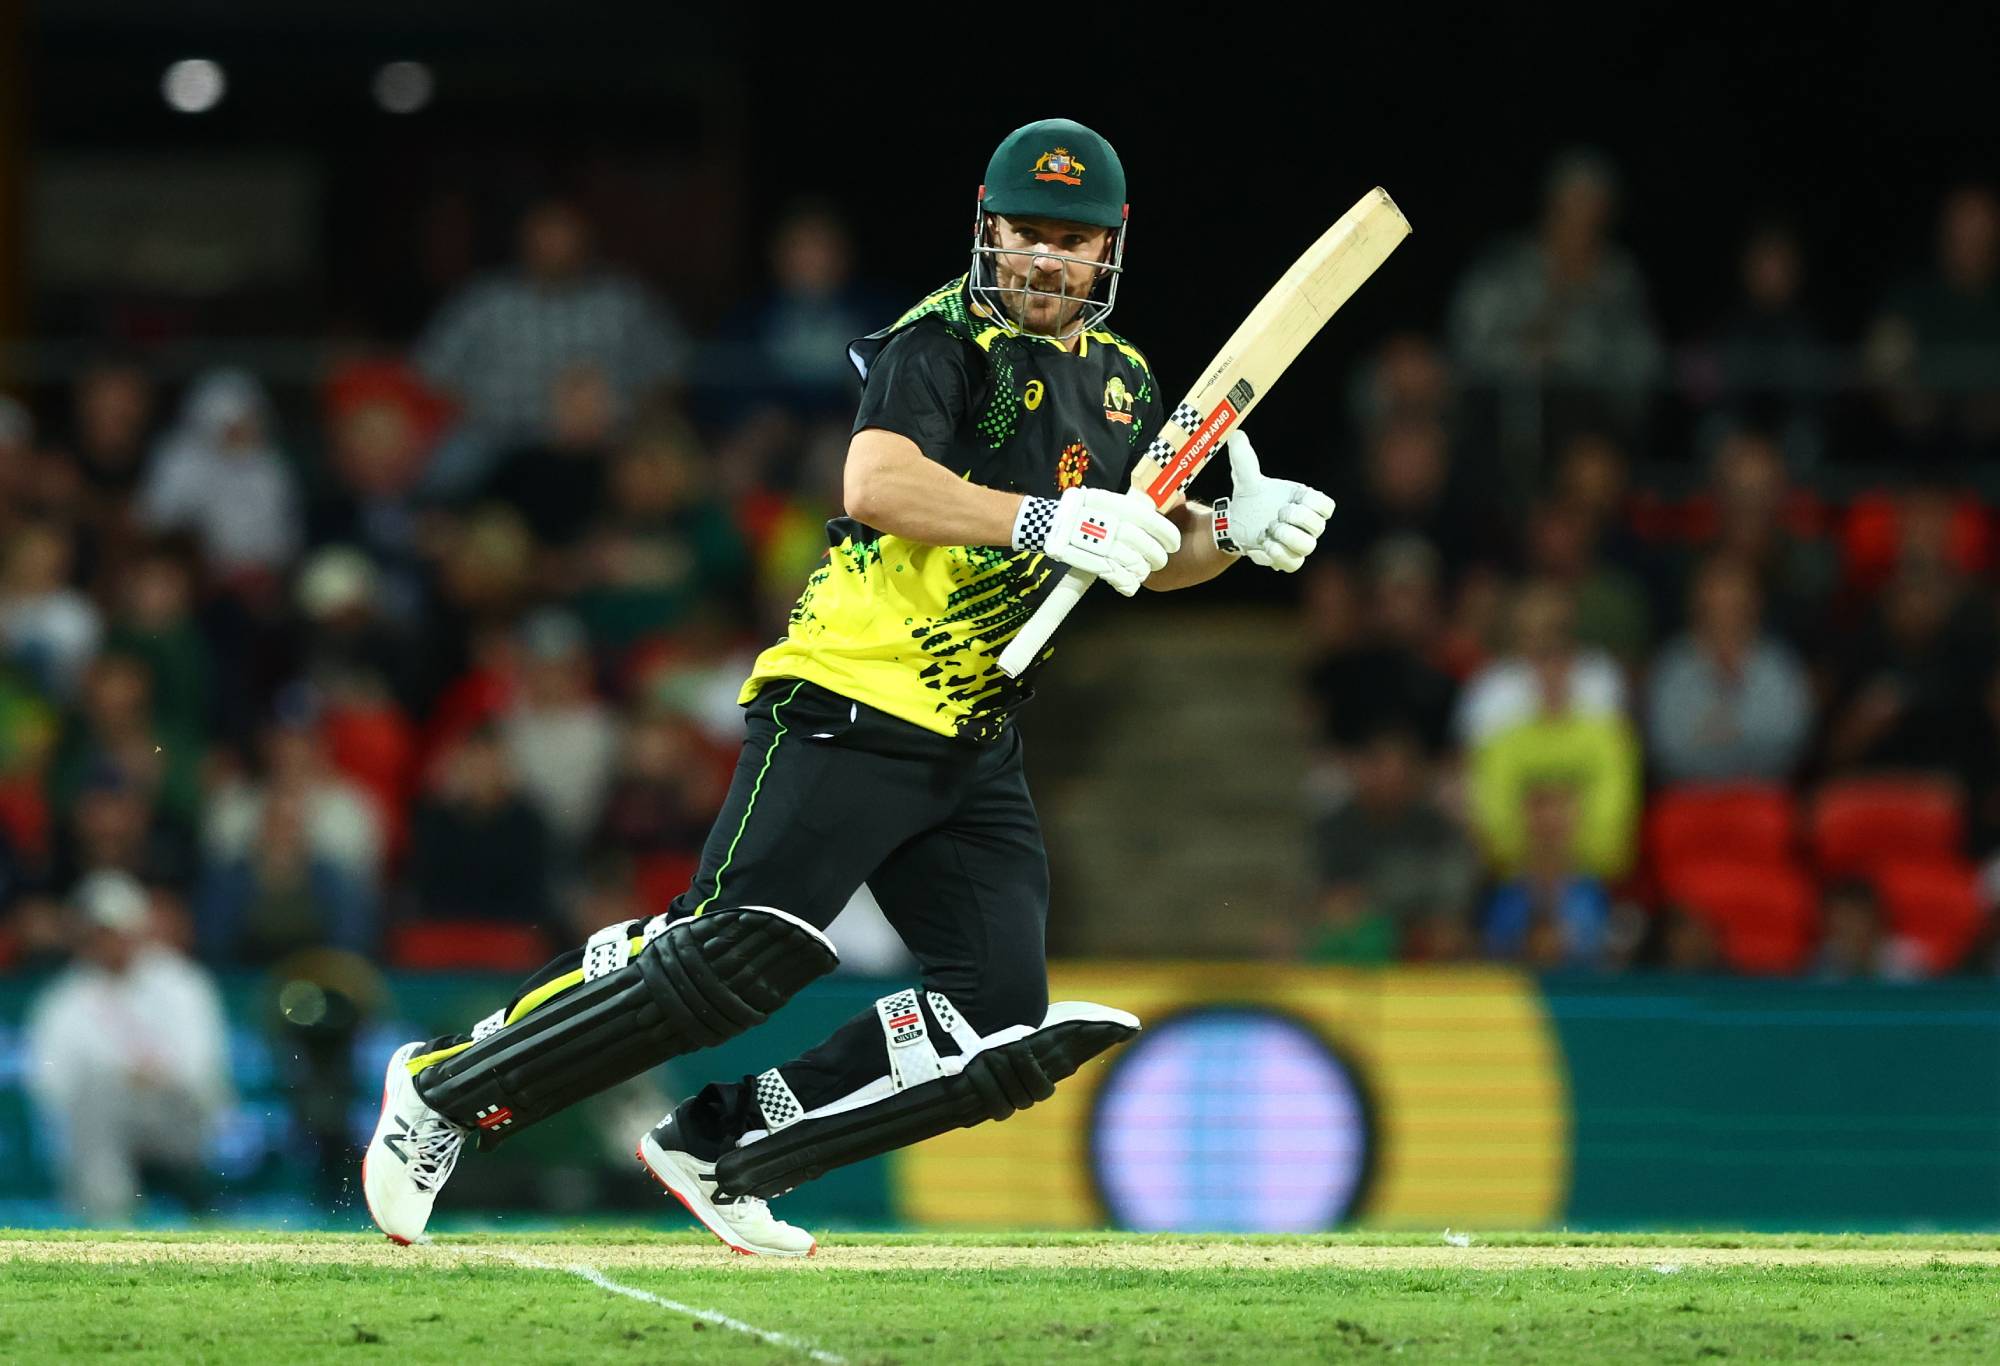 GOLD COAST, AUSTRALIA - OCTOBER 05: Aaron Finch of Australia defeats during game one of the T20 International series between Australia and the West Indies at Metricon Stadium on October 05, 2022 in Gold Coast, Australia.  (Photo by Chris Hyde/Getty Images)